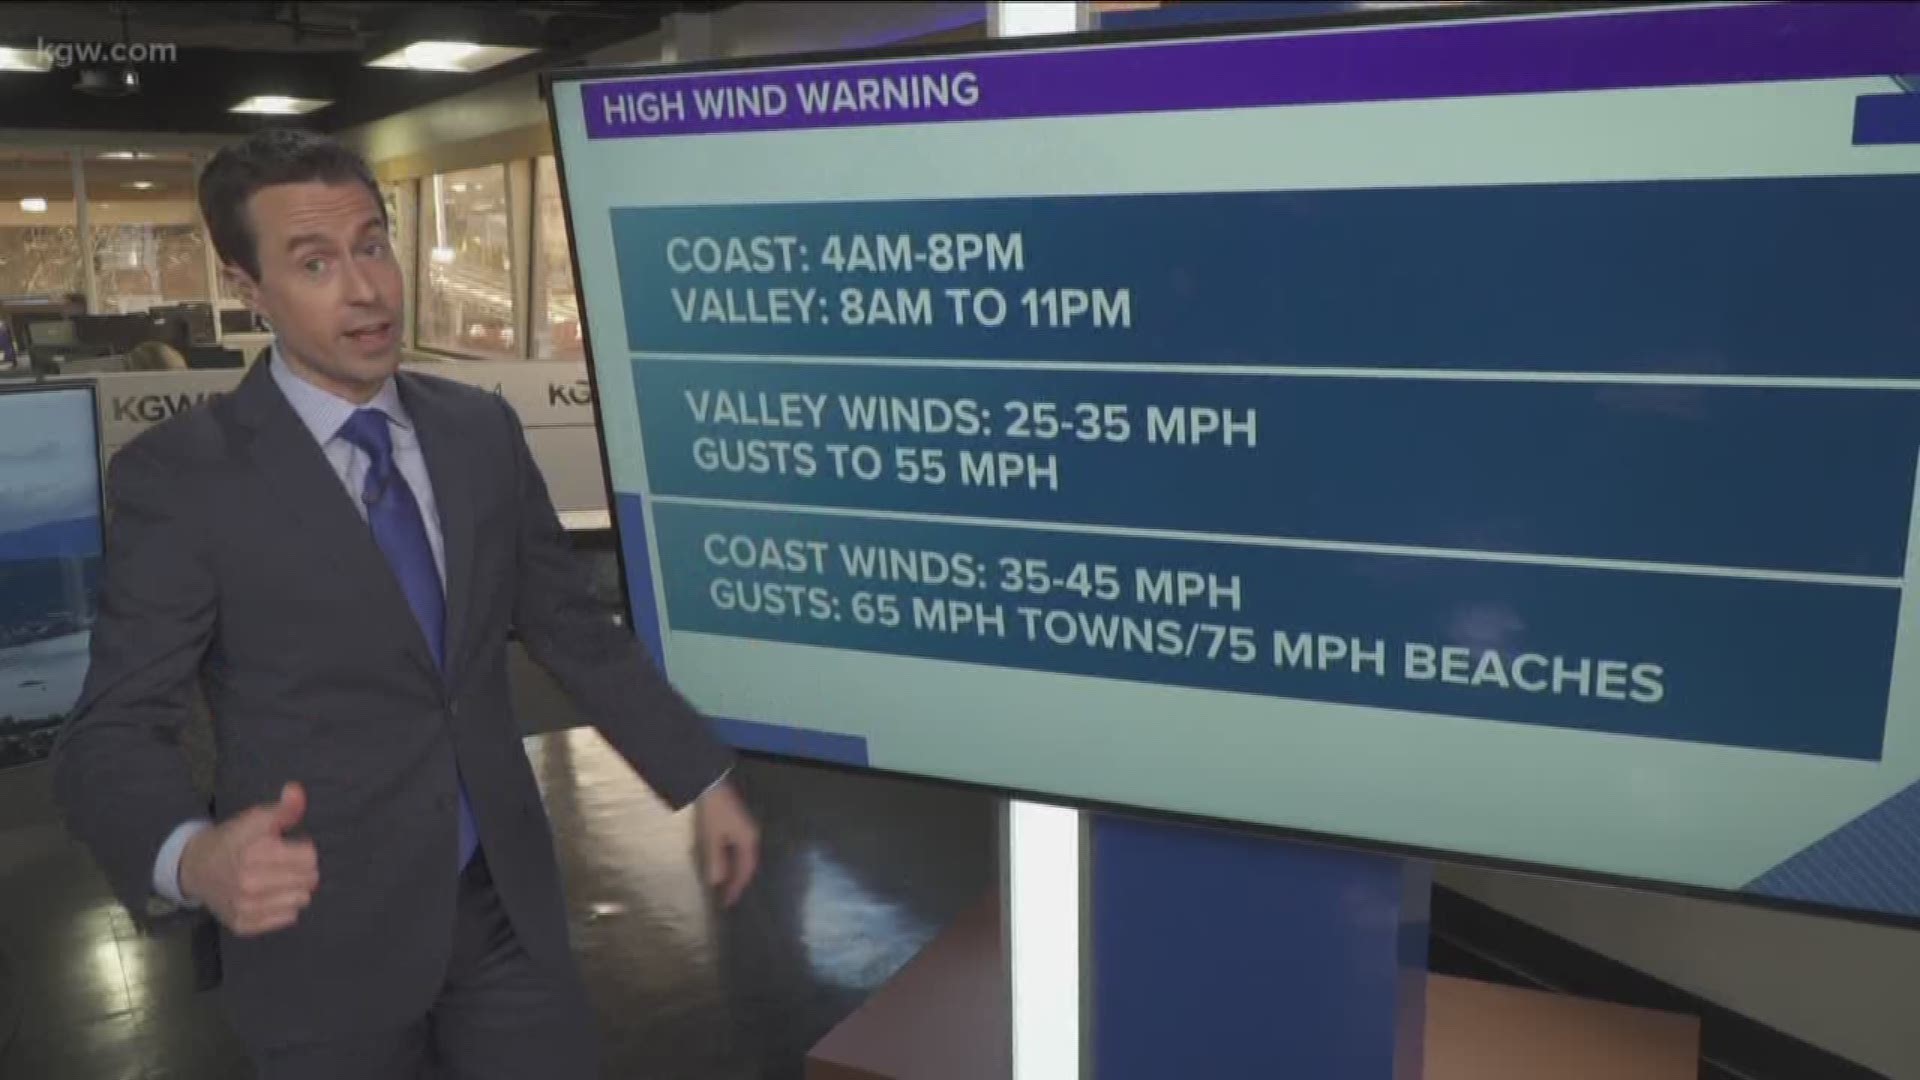 The NWS issued a high wind warning for Saturday